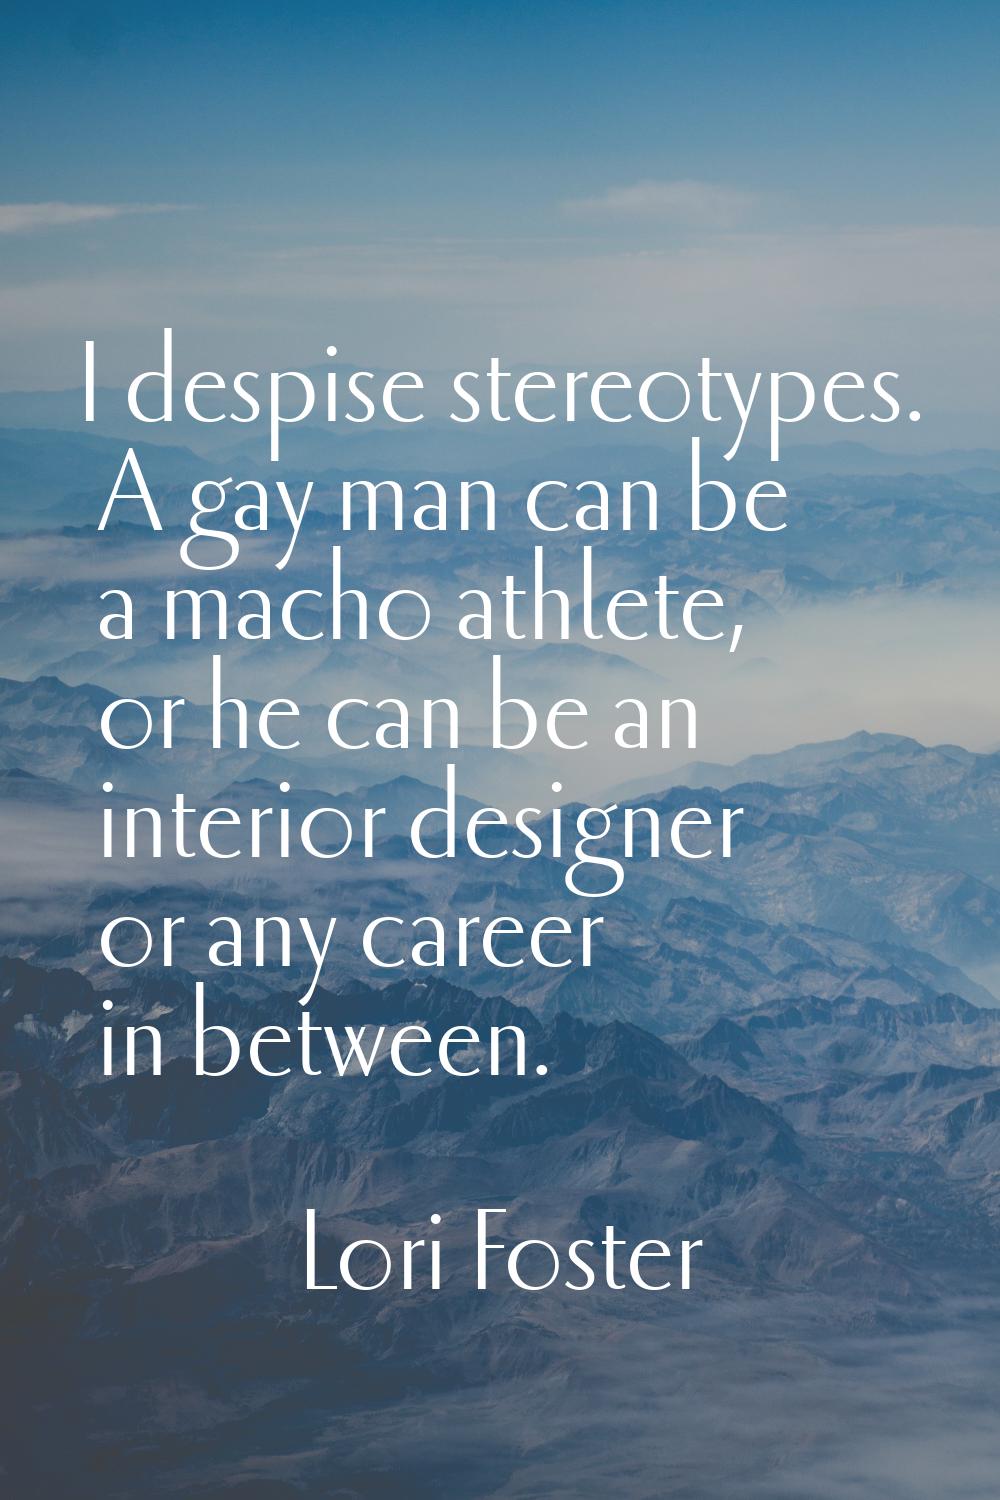 I despise stereotypes. A gay man can be a macho athlete, or he can be an interior designer or any c